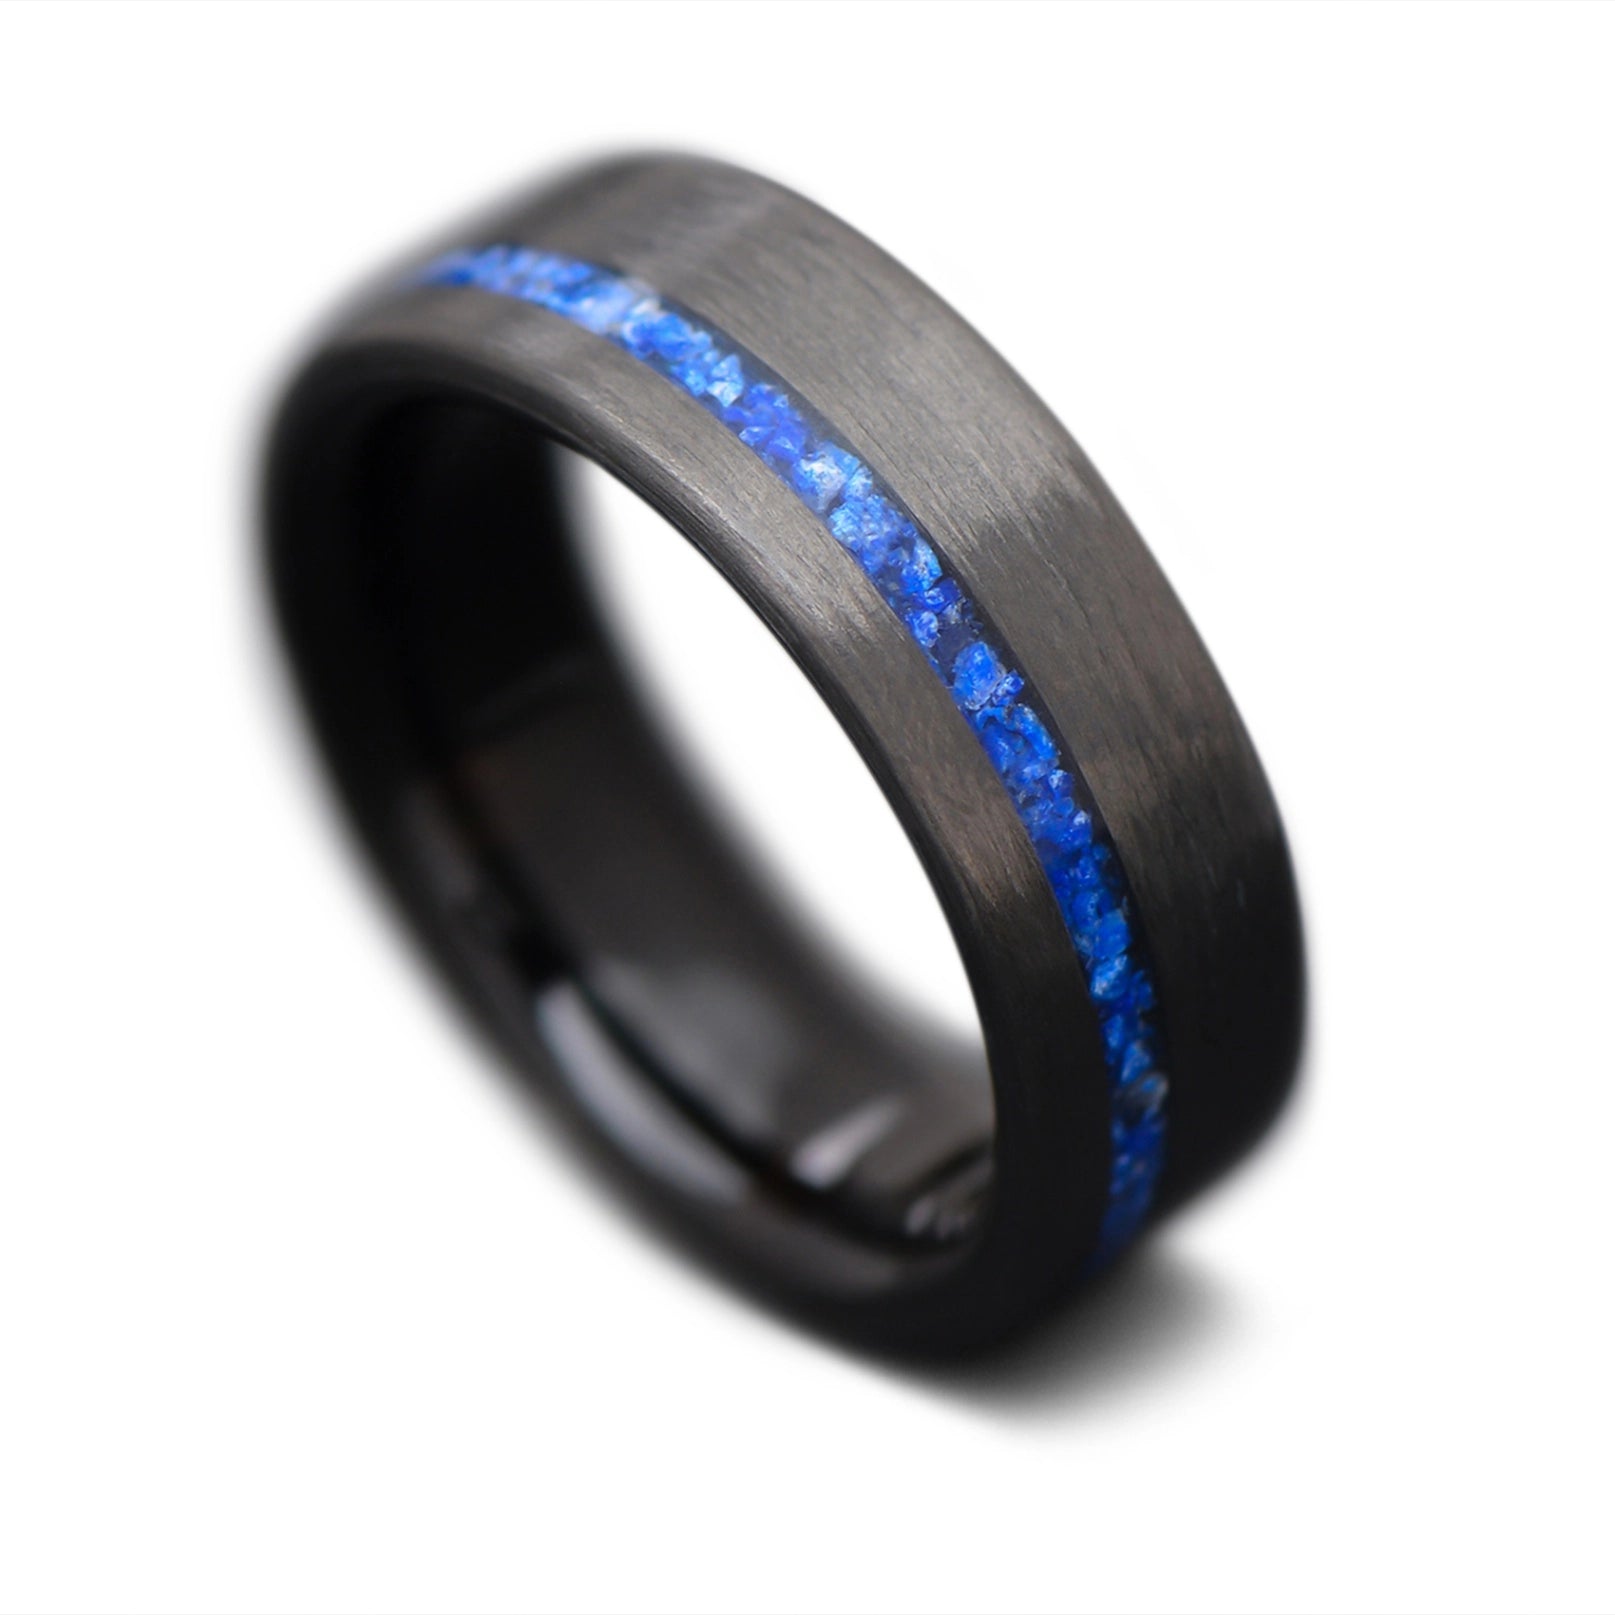 CarbonUni core ring with Lapis Lazuli inlay and African Blackwood inner sleeve, 7mm -THE VERTEX